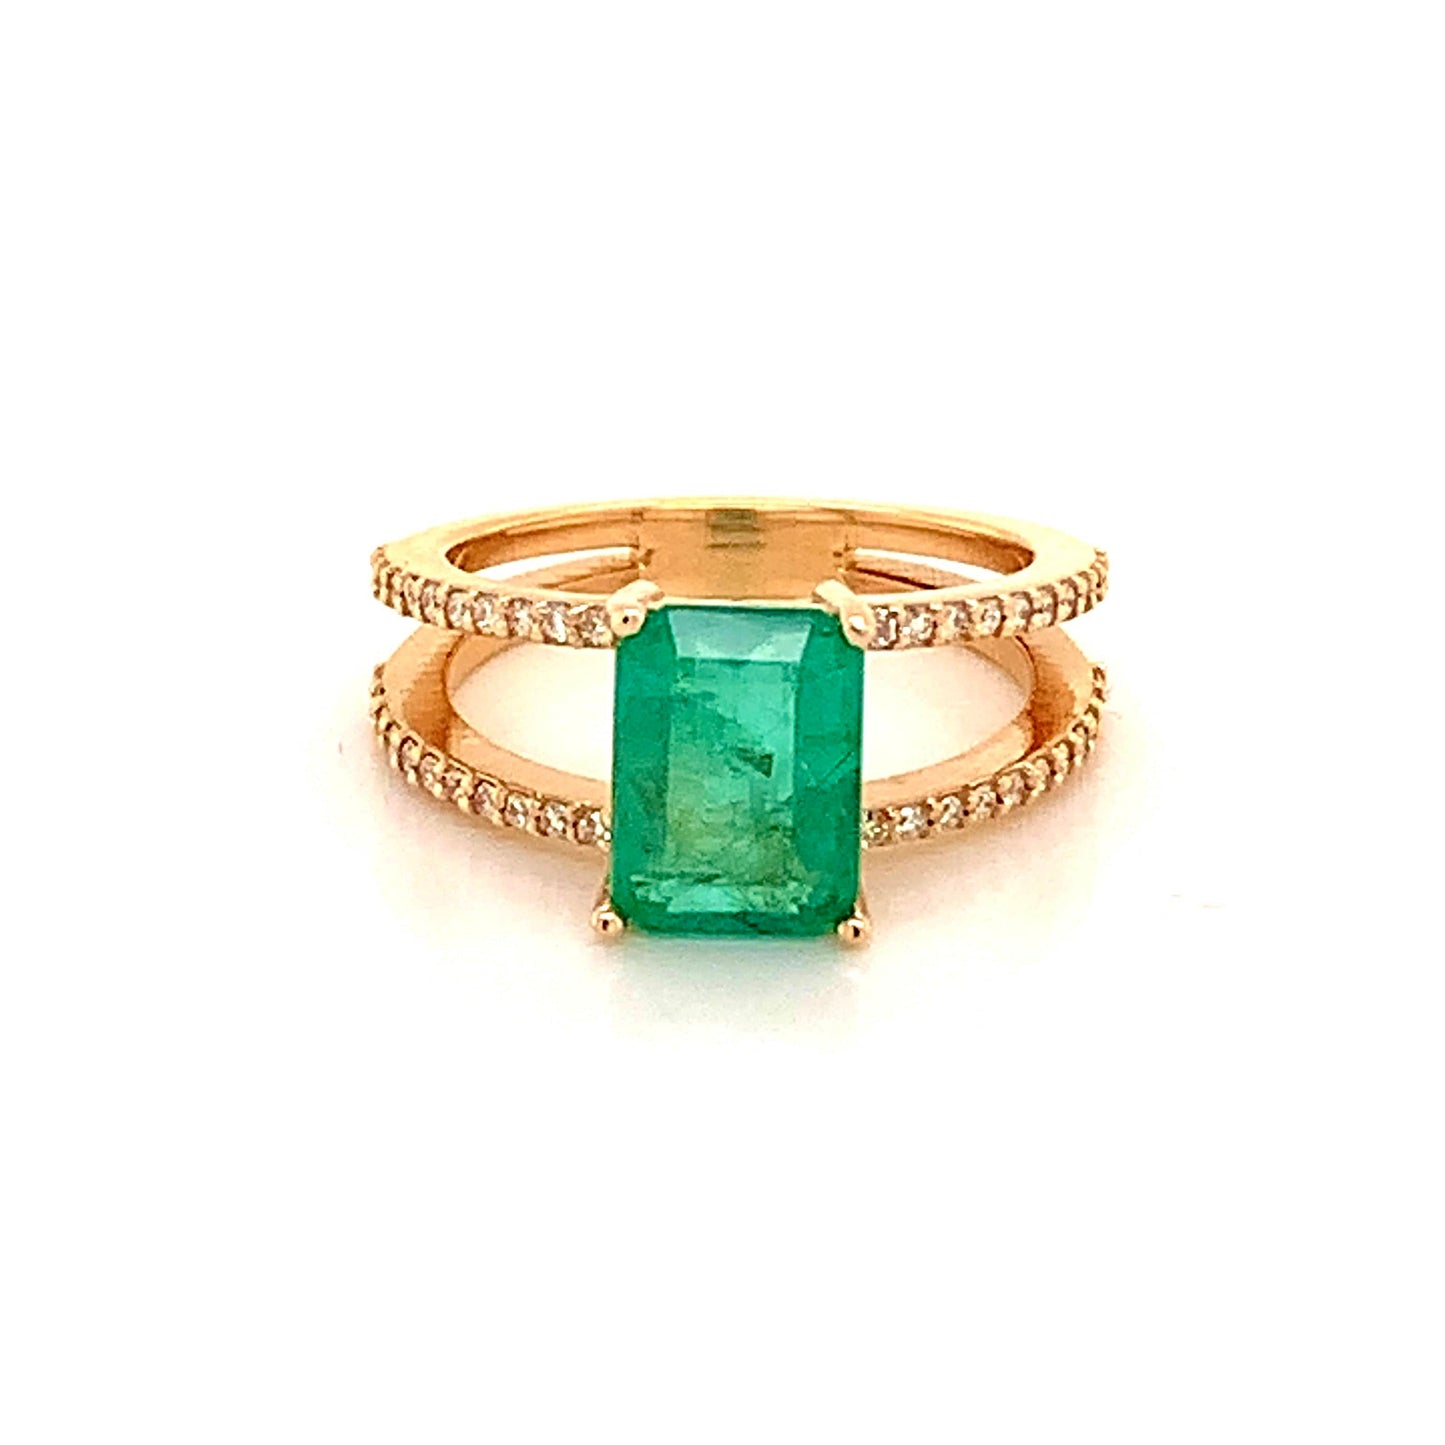 Natural Emerald Diamond Ring 14k Gold 2.32 TCW Size 7 Certified $5,950 111874